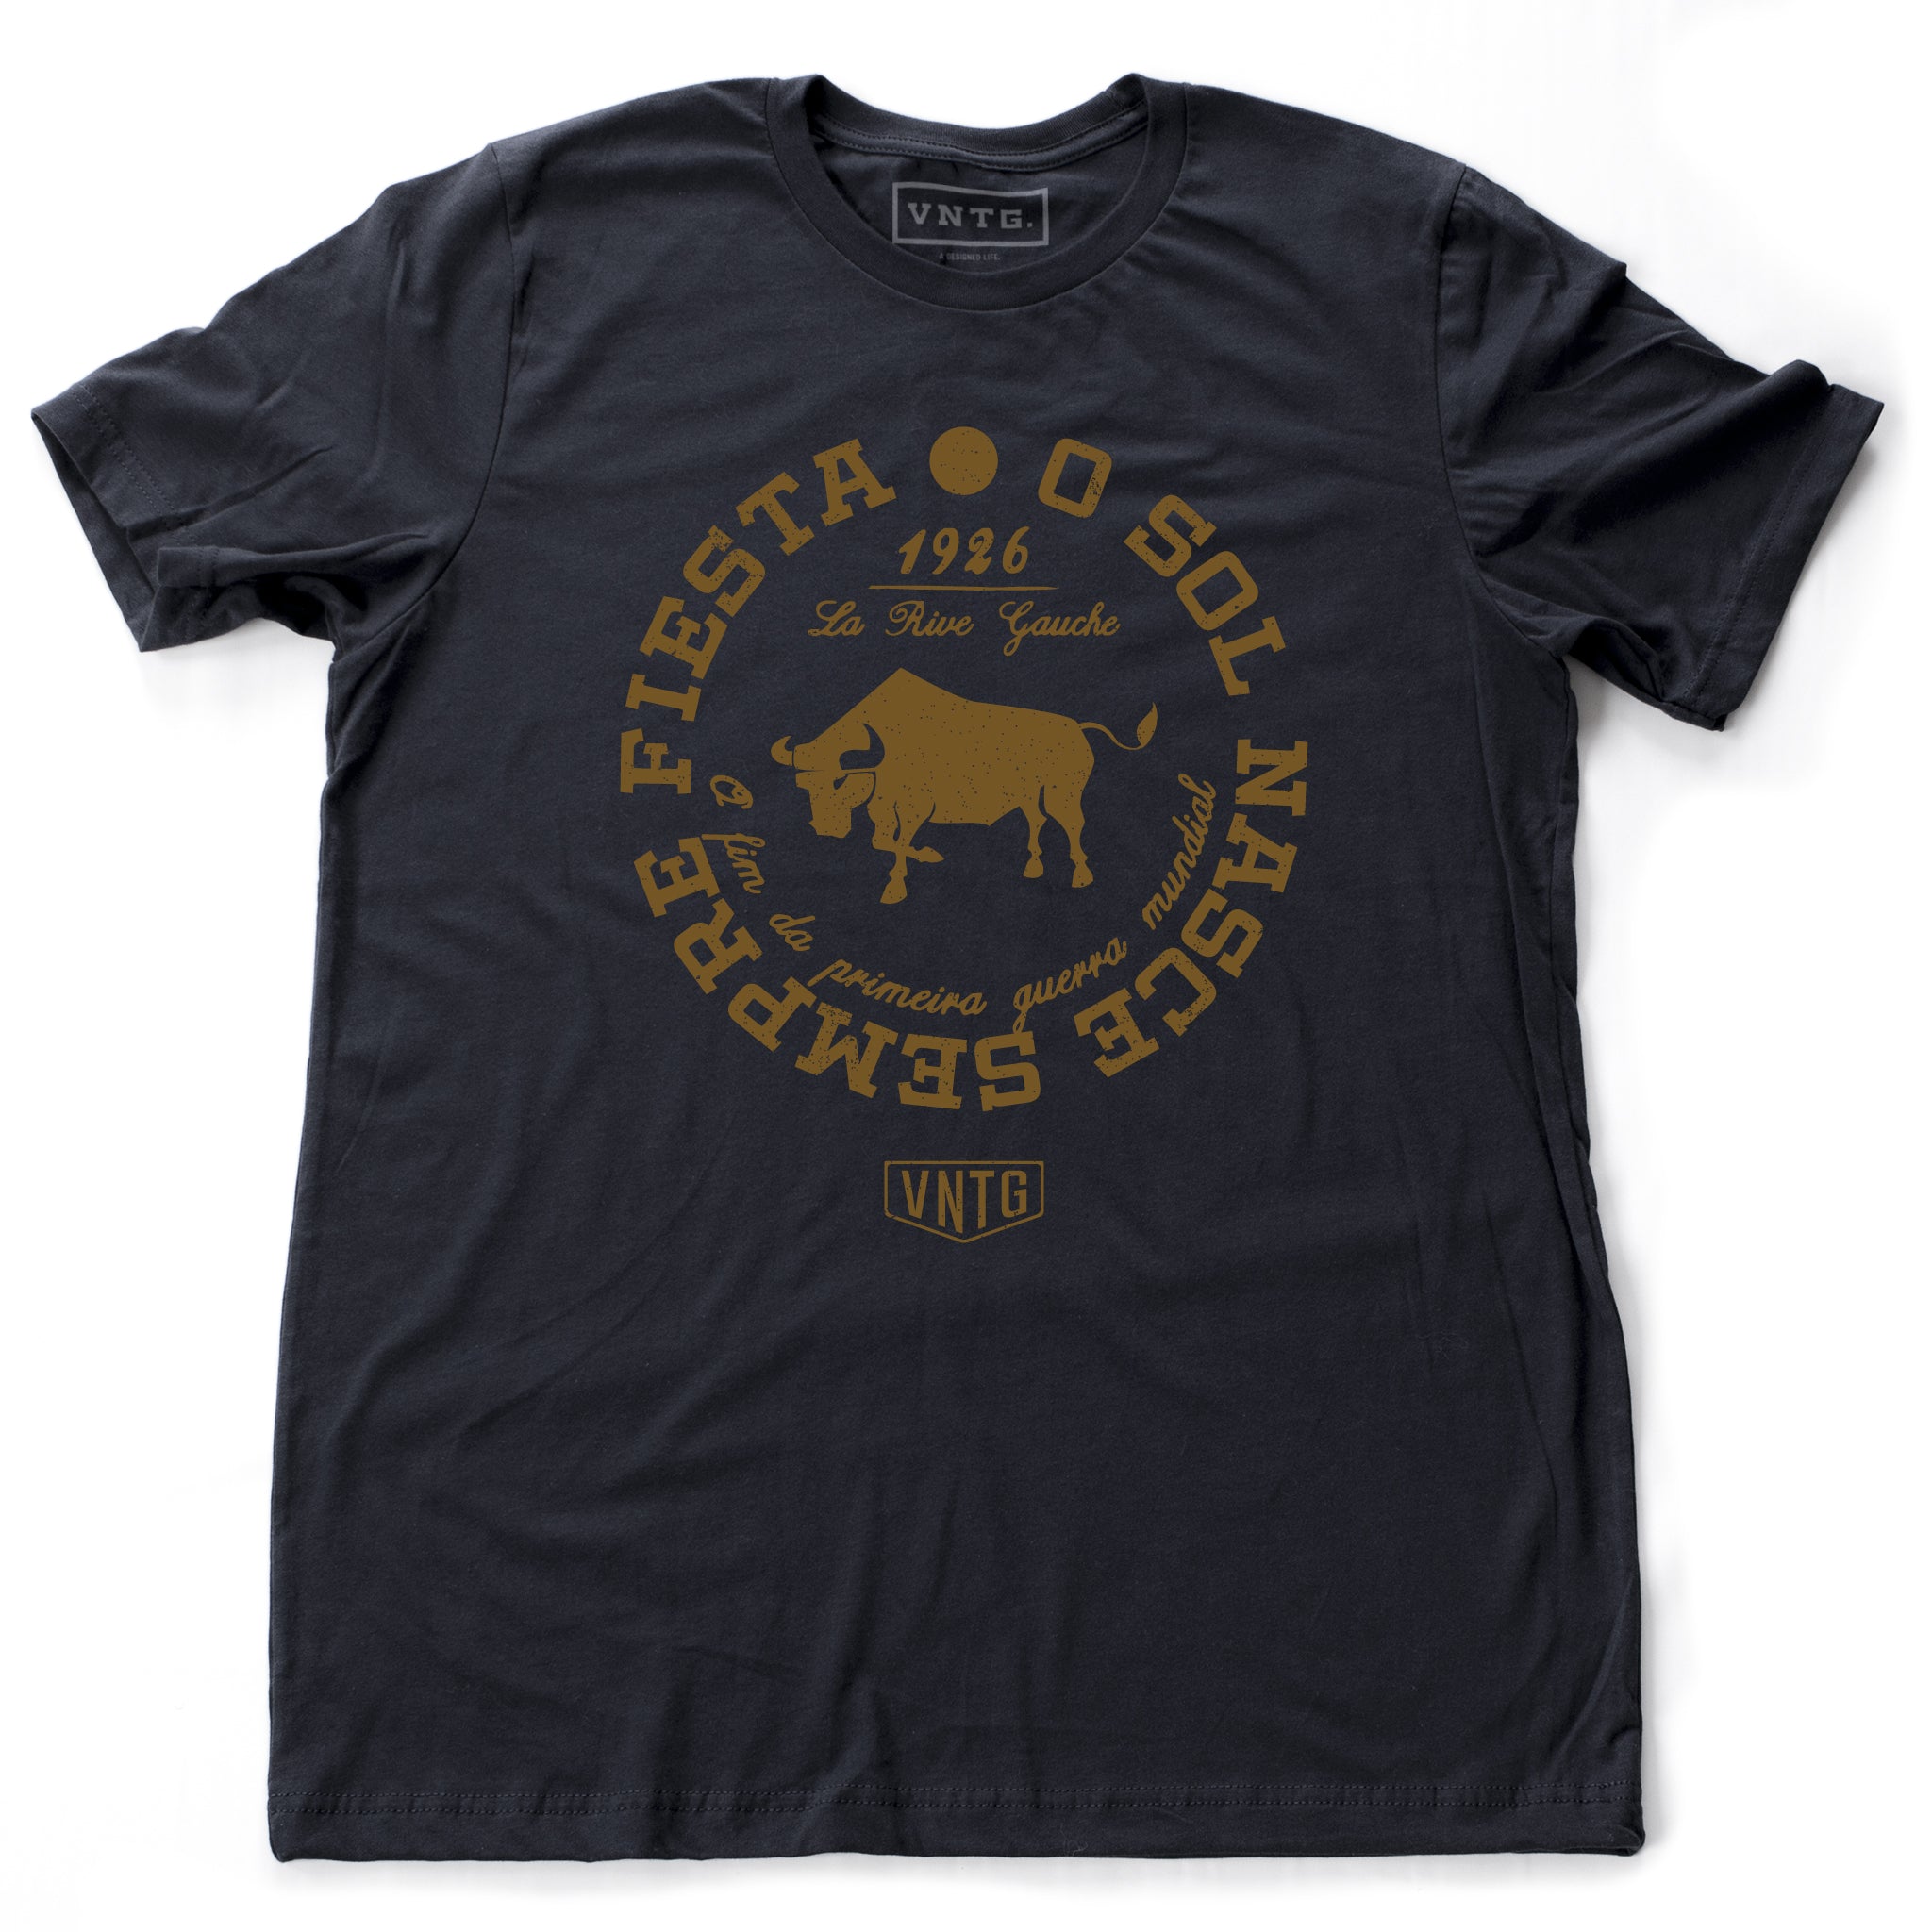 A Classic fashion t-shirt celebrating Ernest Hemingway’s novel “THE SUN ALSO RISES,” in its Portuguese language translation. It reads “O Sol Nasce Sempre Fiesta” around the image of a bull and the date the novel was published, 1926. By fashion brand VNTG., from wolfsaint.net